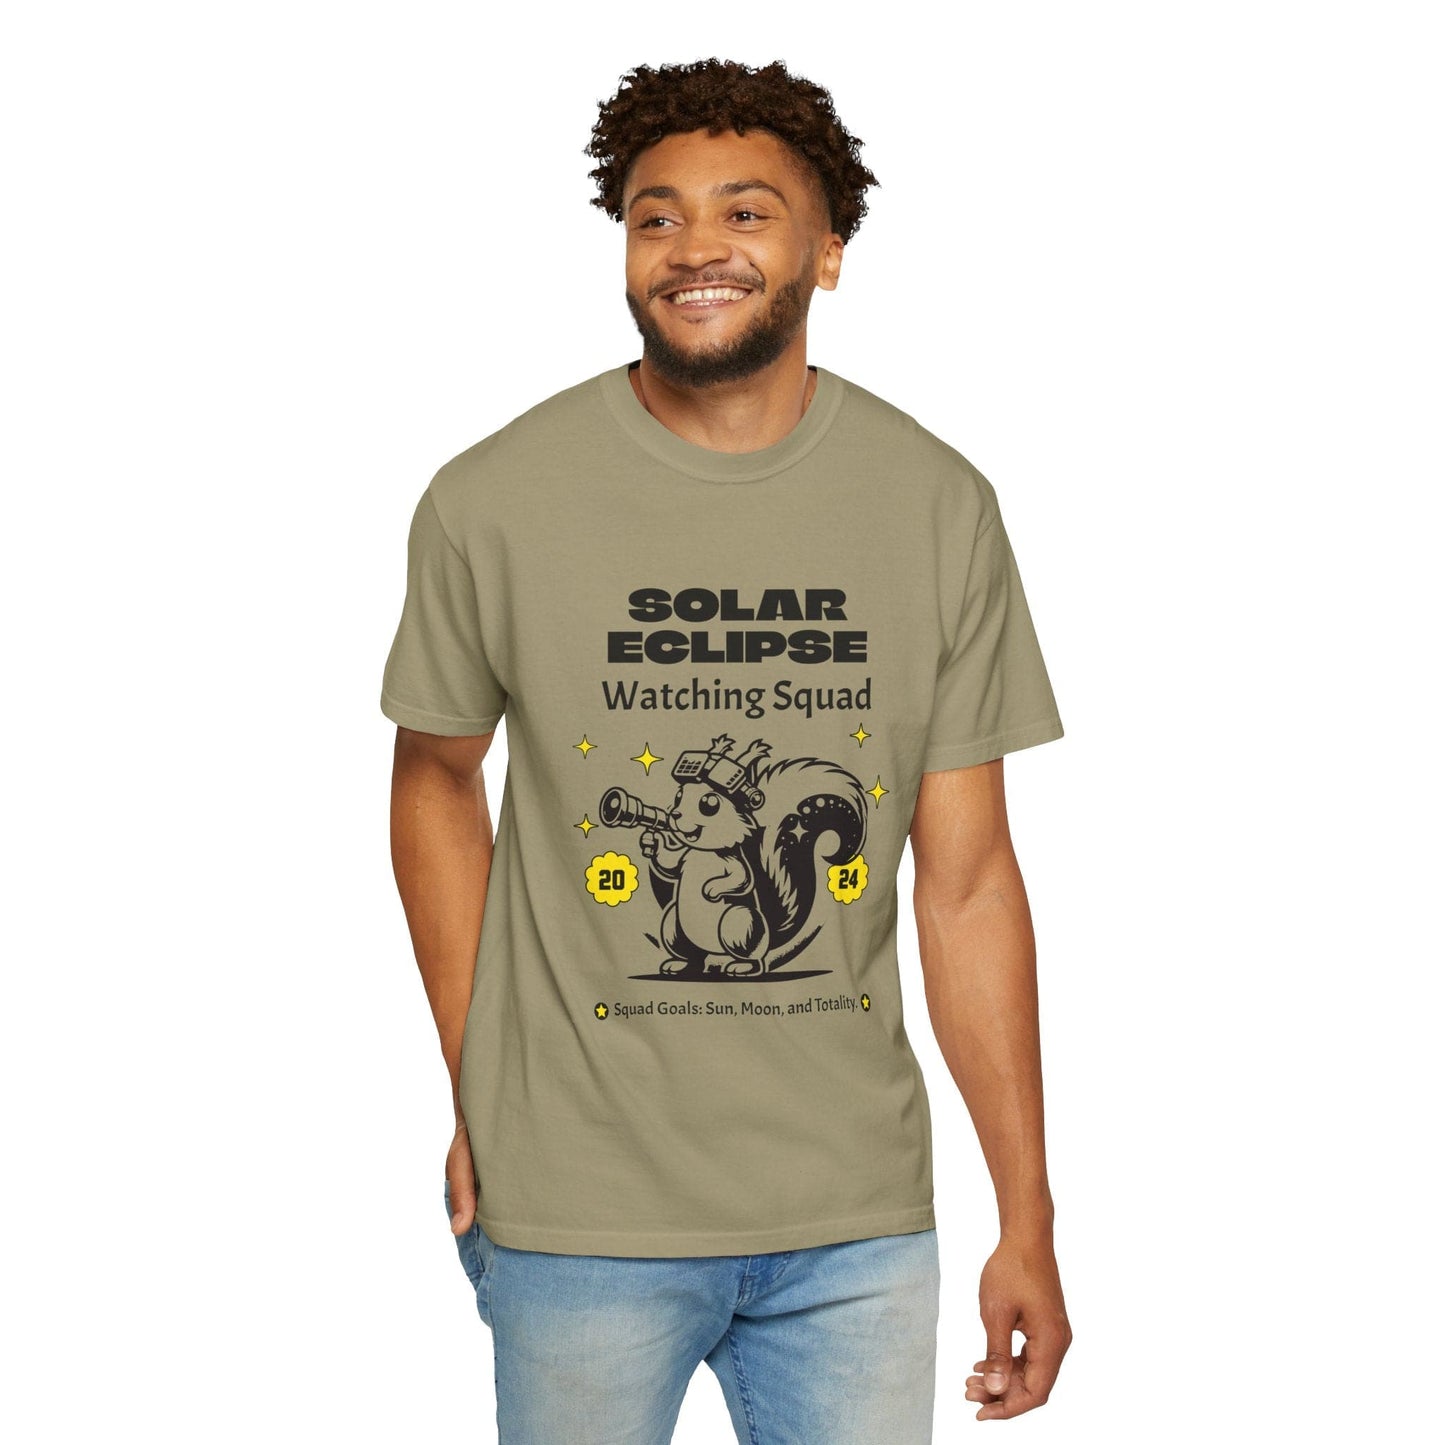 Solar Eclipse Watching Squad 2024 Comfort Colors Tee Adult S-4XL - Ivory/Khaki, April 18 2024 Eclipse Path of Totality Shirt, Solar Eclipse Viewing Tee